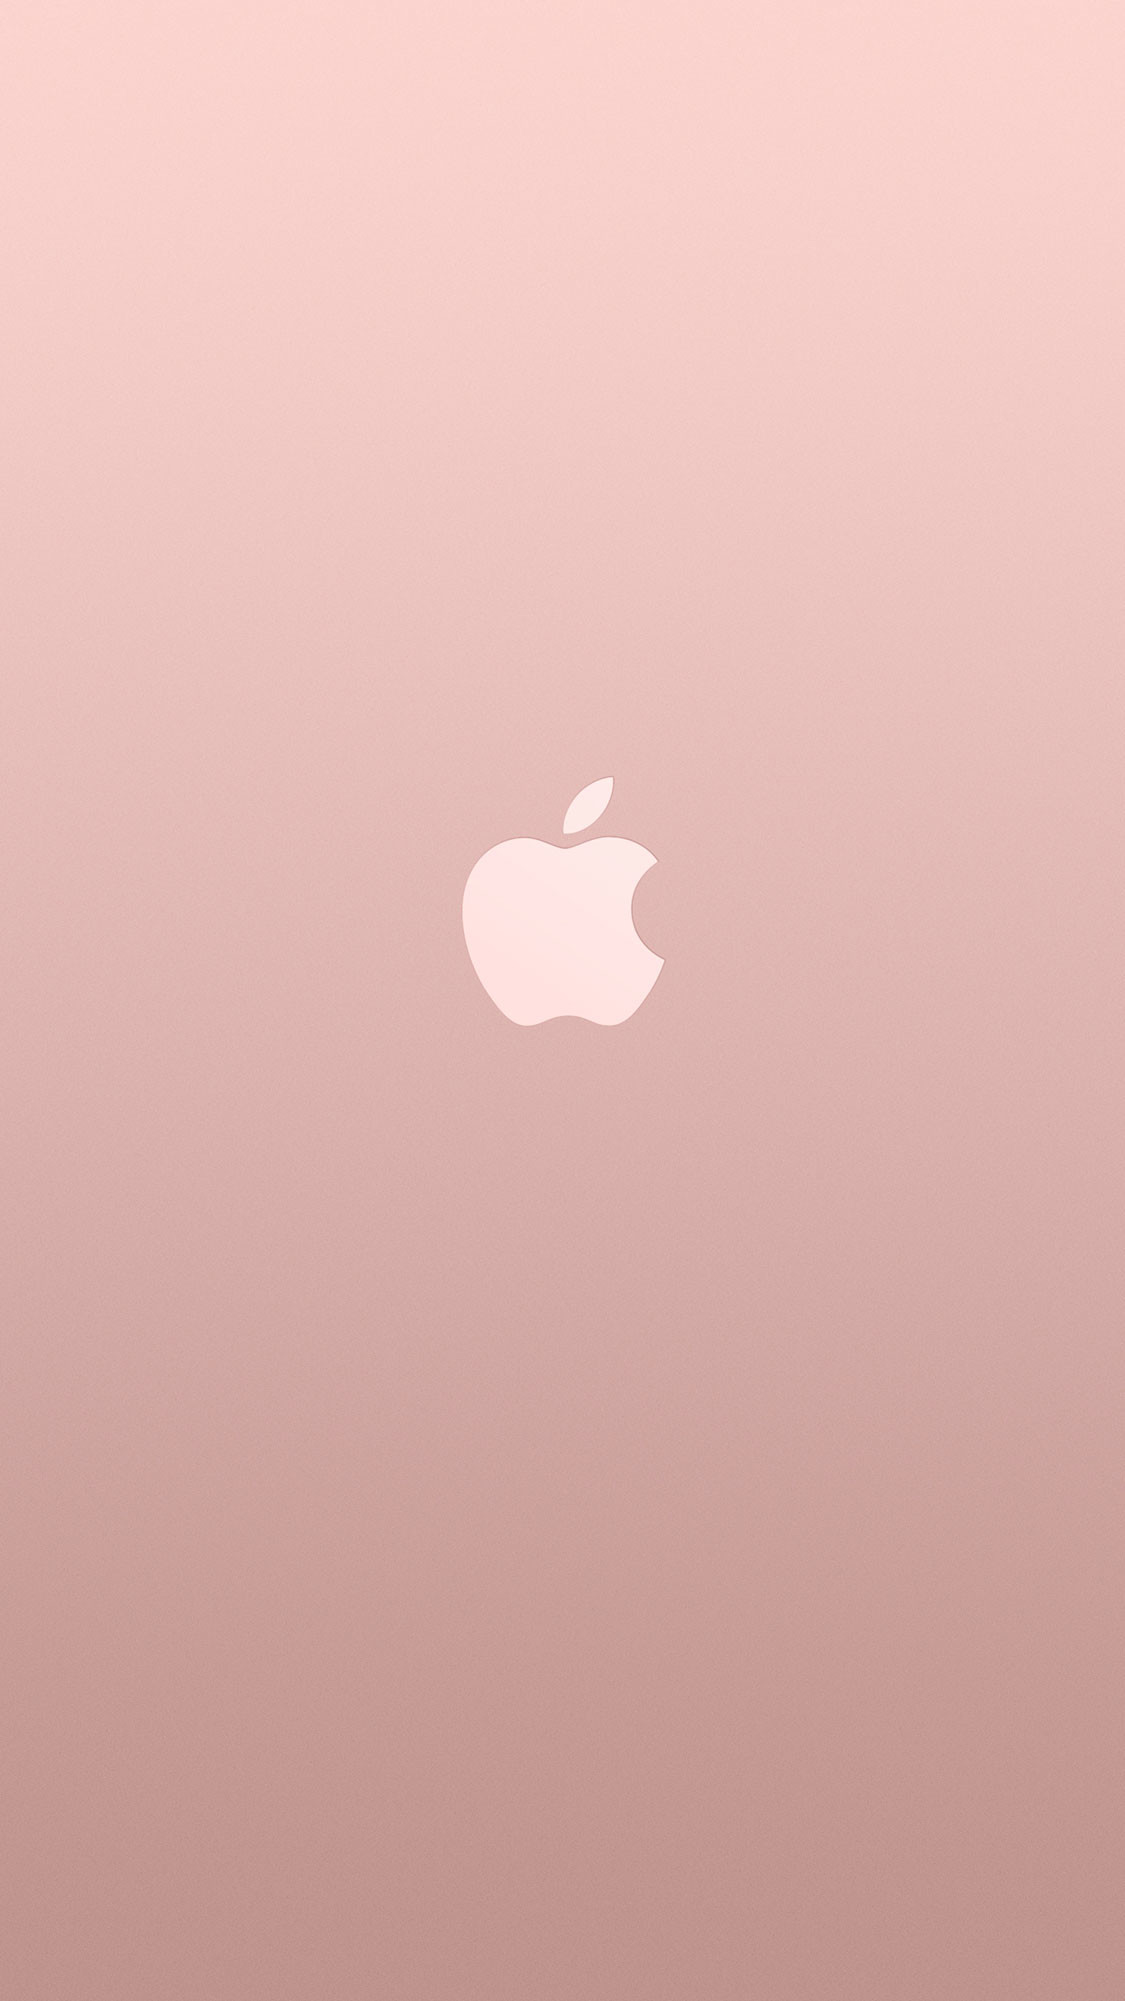 20+ New iPhone 6 & 6S Wallpapers & Backgrounds in HD Quality